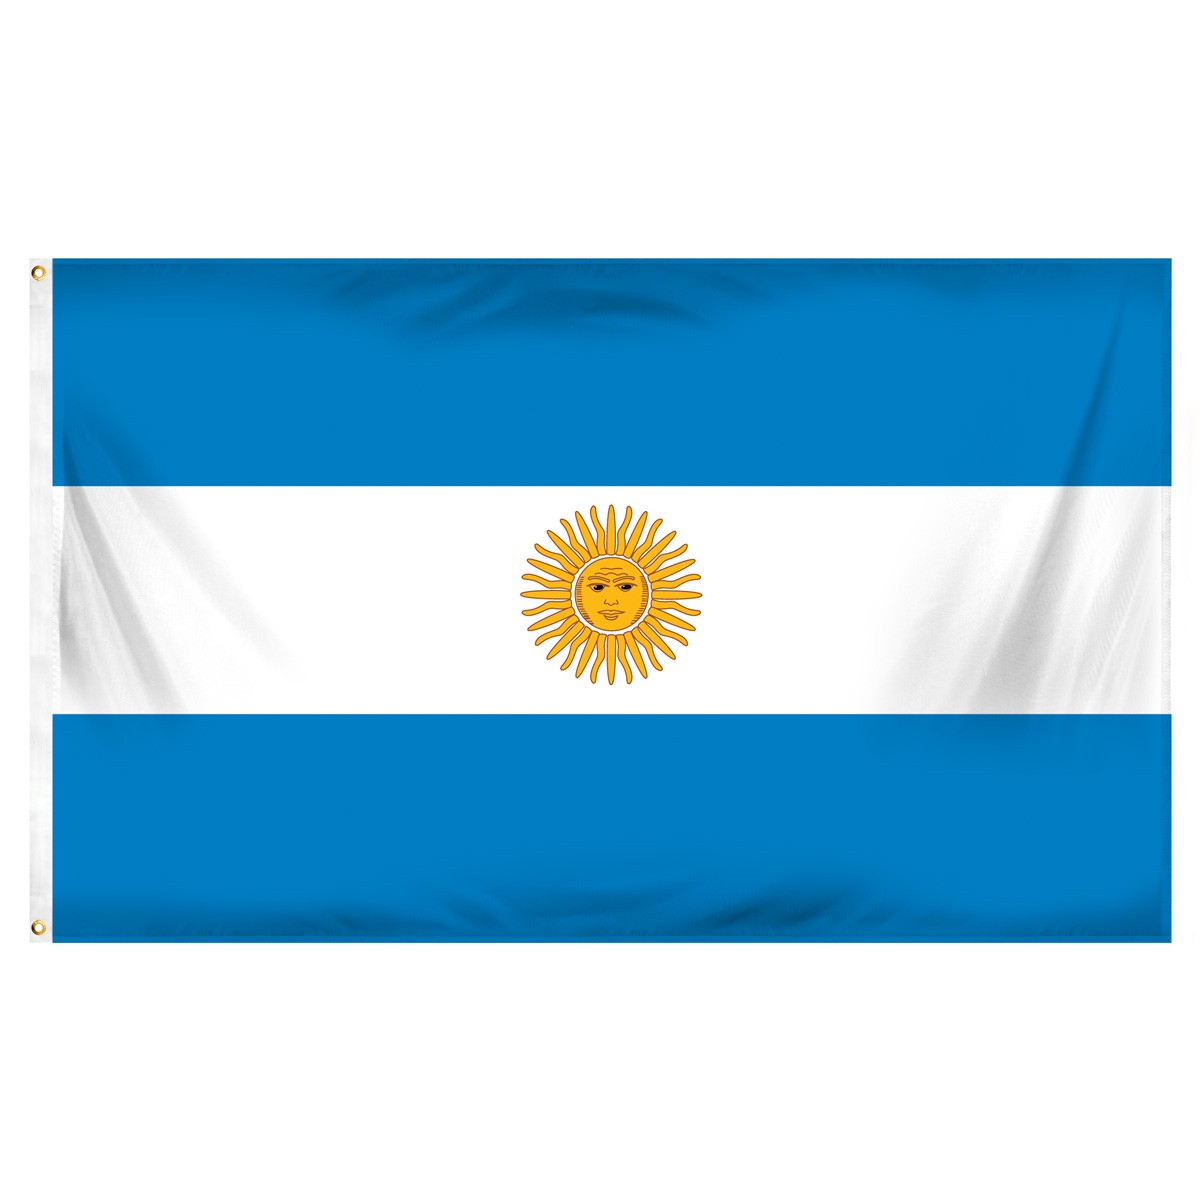 Argentina Building Pennants and Flags